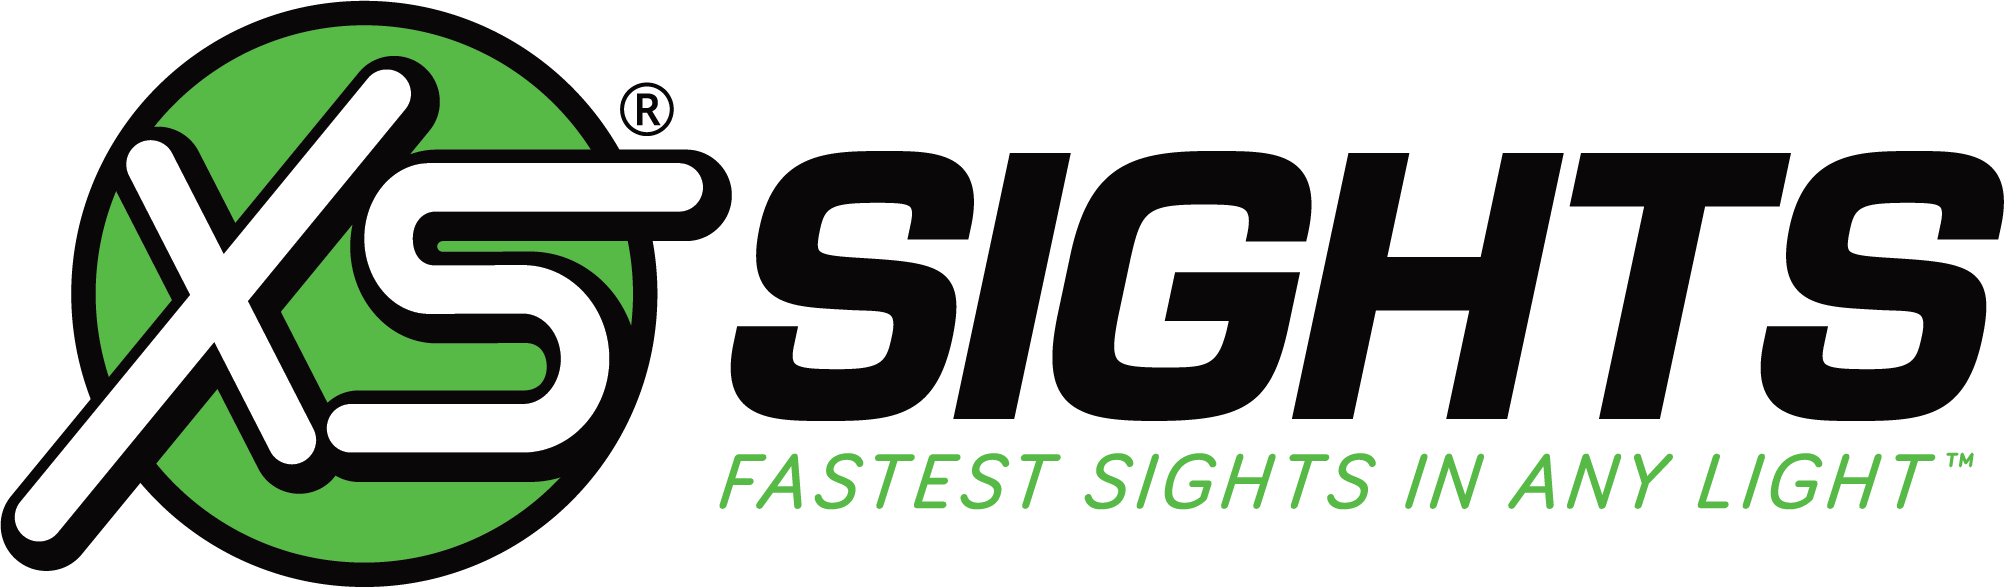 XSSights_Logo_Color.png